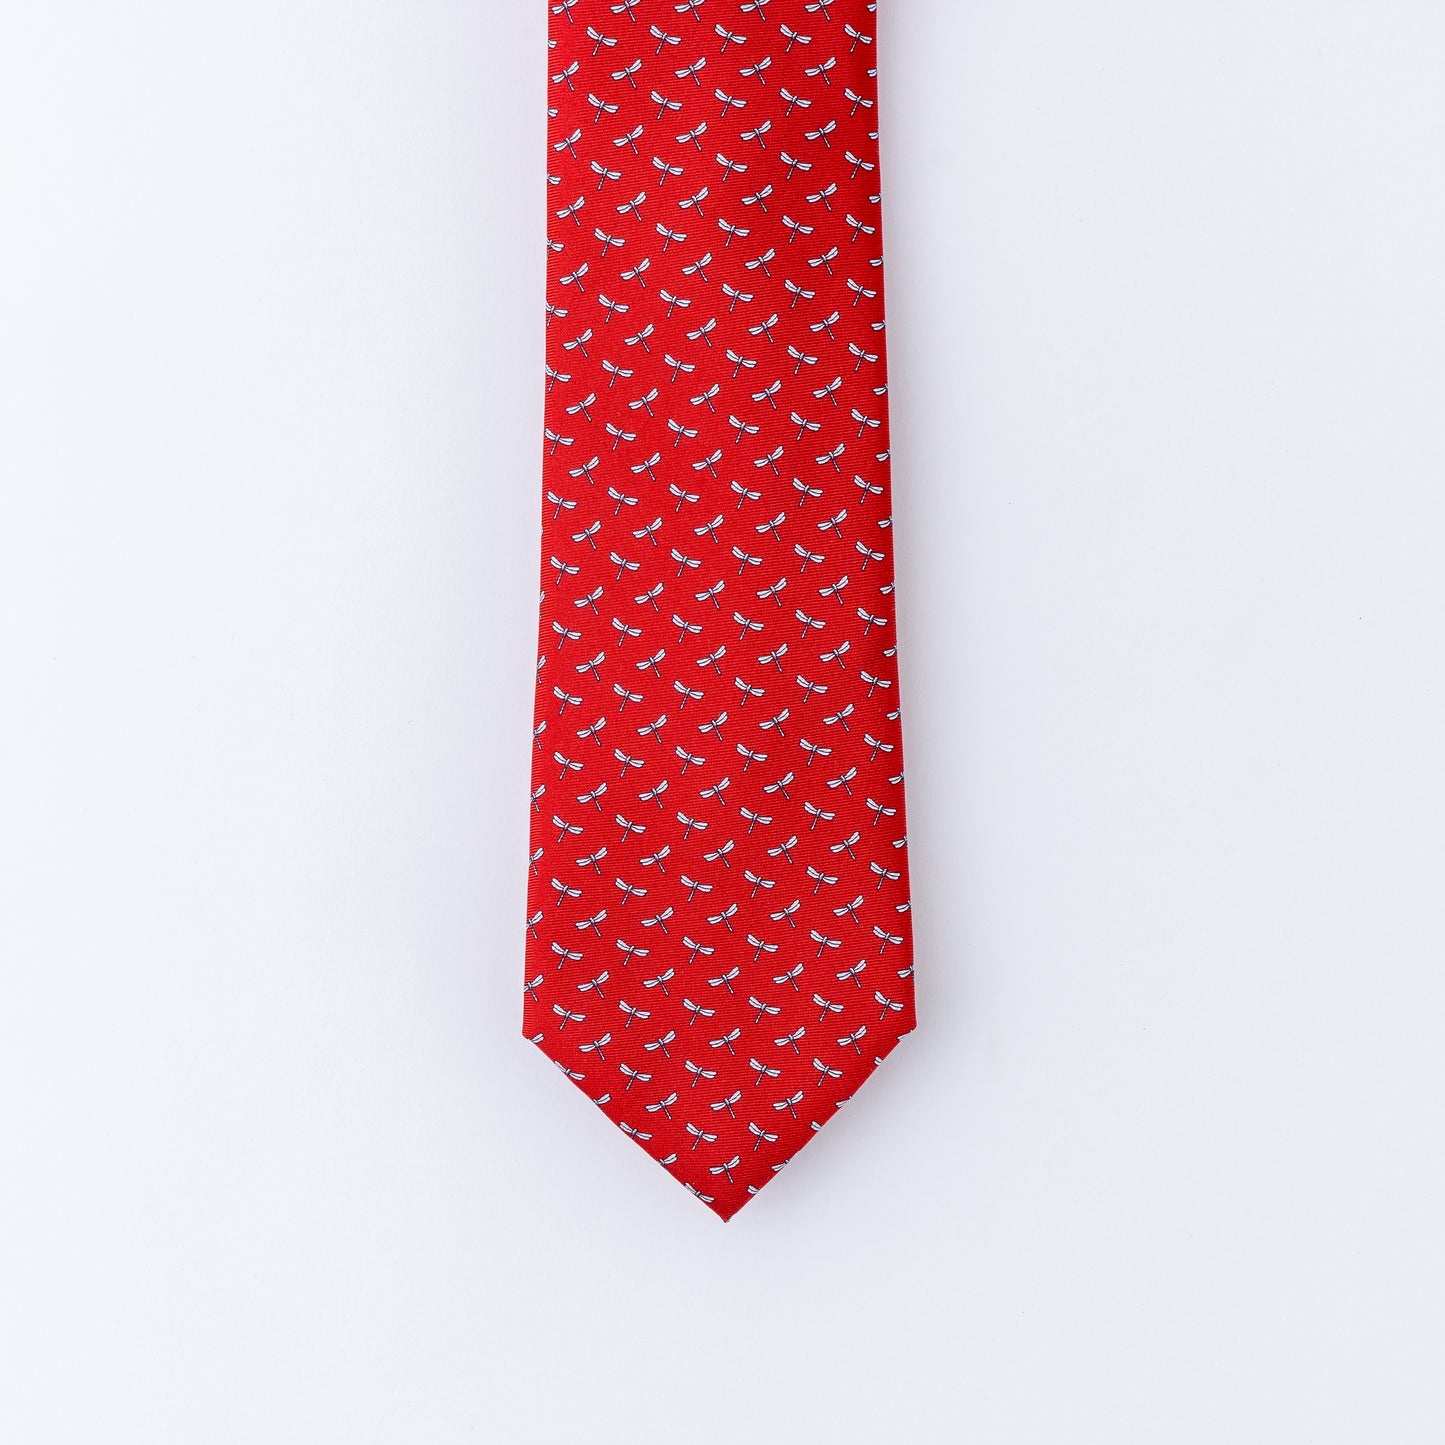 Dragonfly Tie - 3 Colors Available